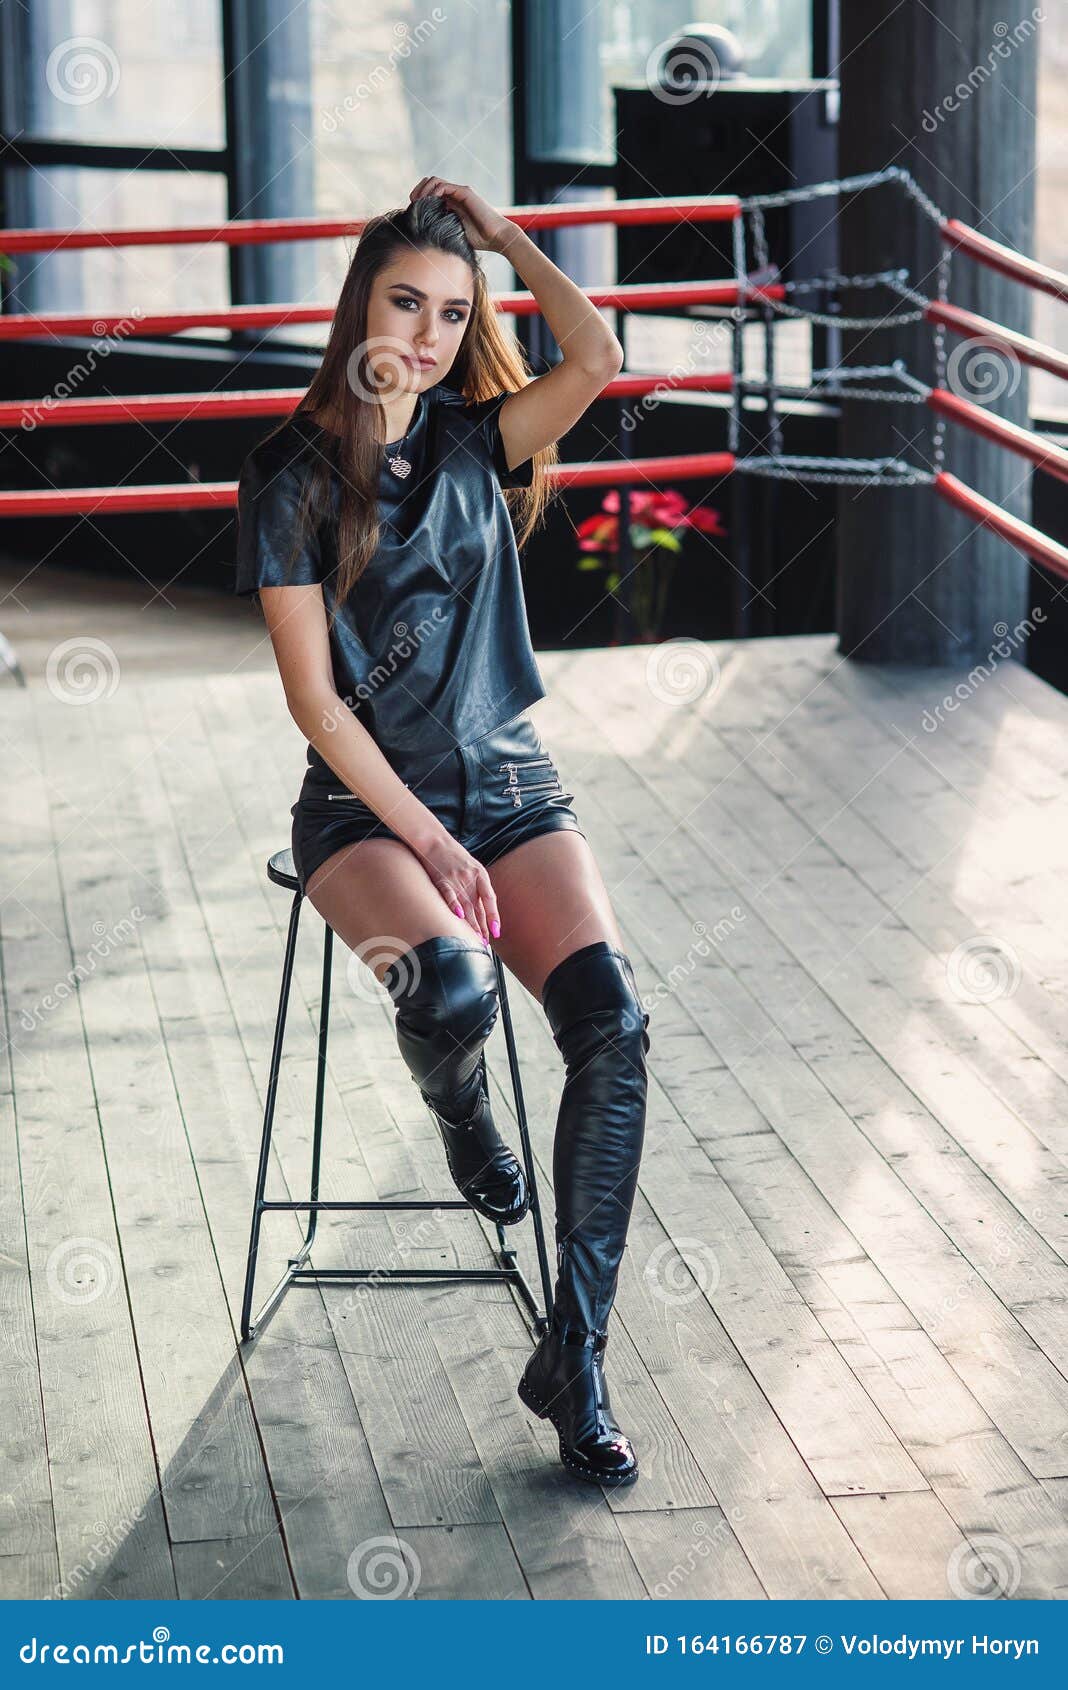 Download Attractive Model Wearing Leather Shorts And Jacket Posing On Boxing Ring Stock Image Image Of Fashion Hair 164166787